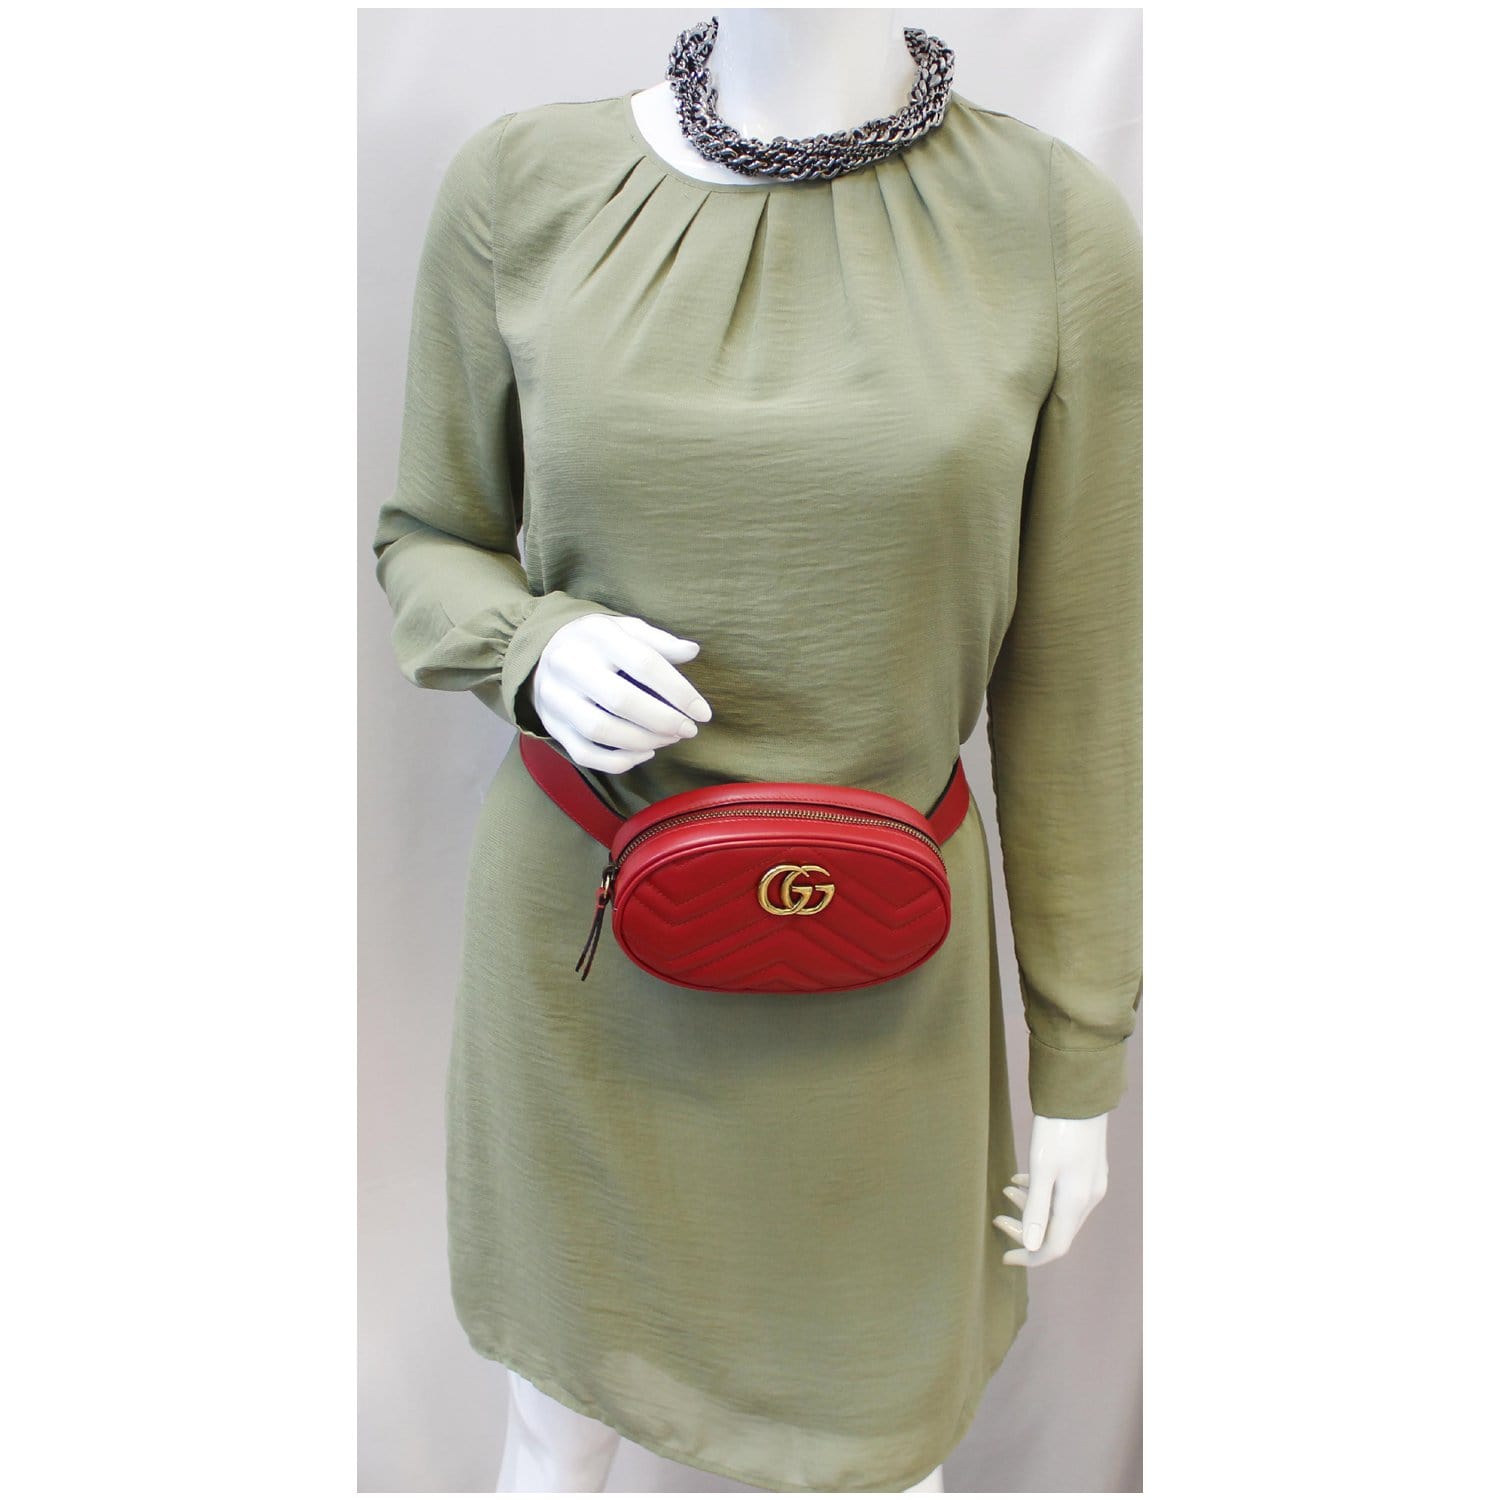 New Authentic Women Gucci Slim Marmont GG Big Logo Leather Belt Red Size 75  $690